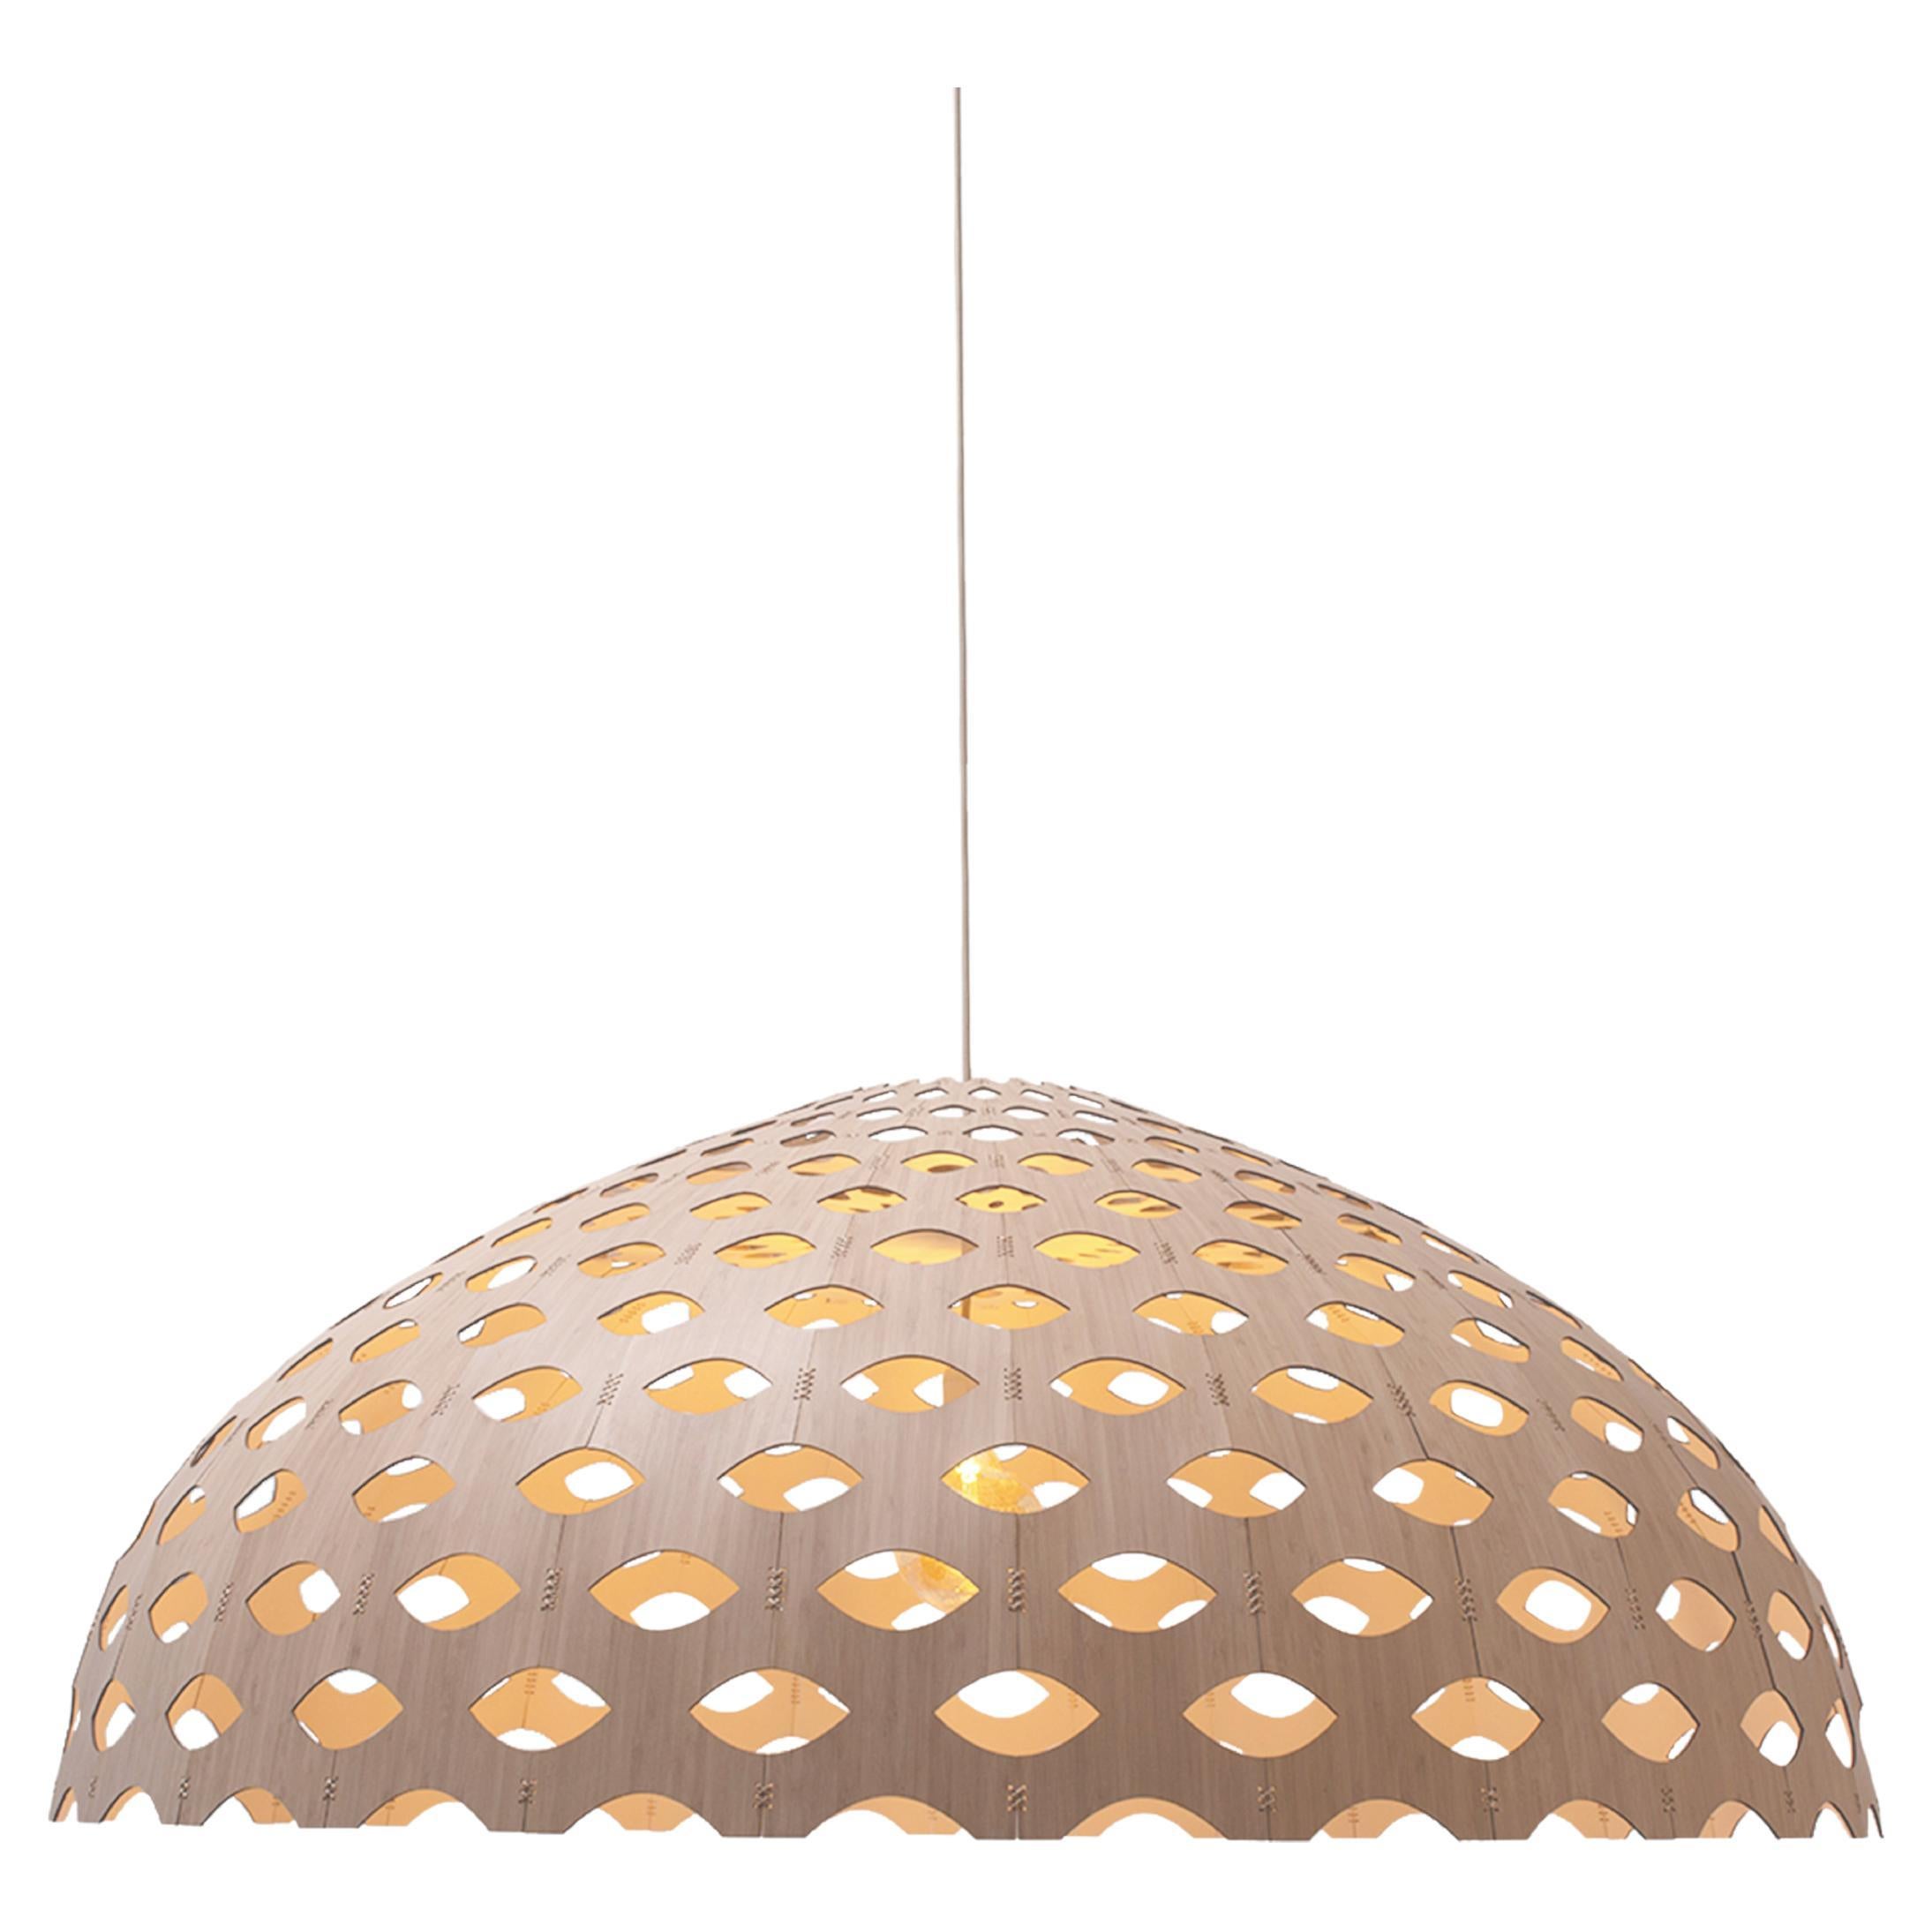 Panelitos Dome Lamp Medium by Piegatto, a Contemporary Sculptural Lamp For Sale